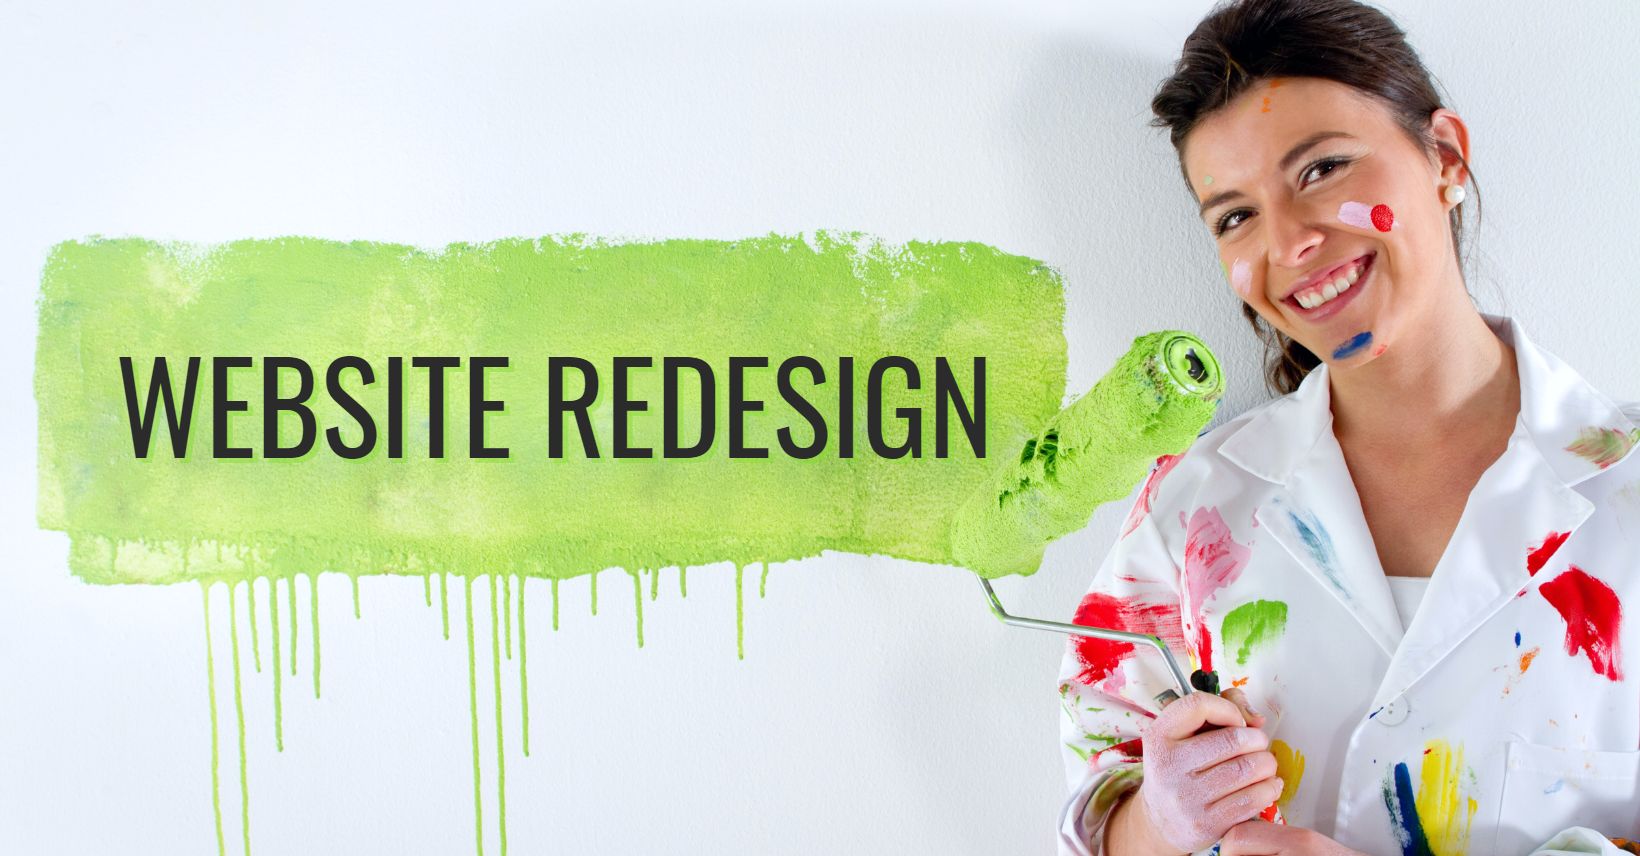 5 Signs You’re Ready For A Website Redesign